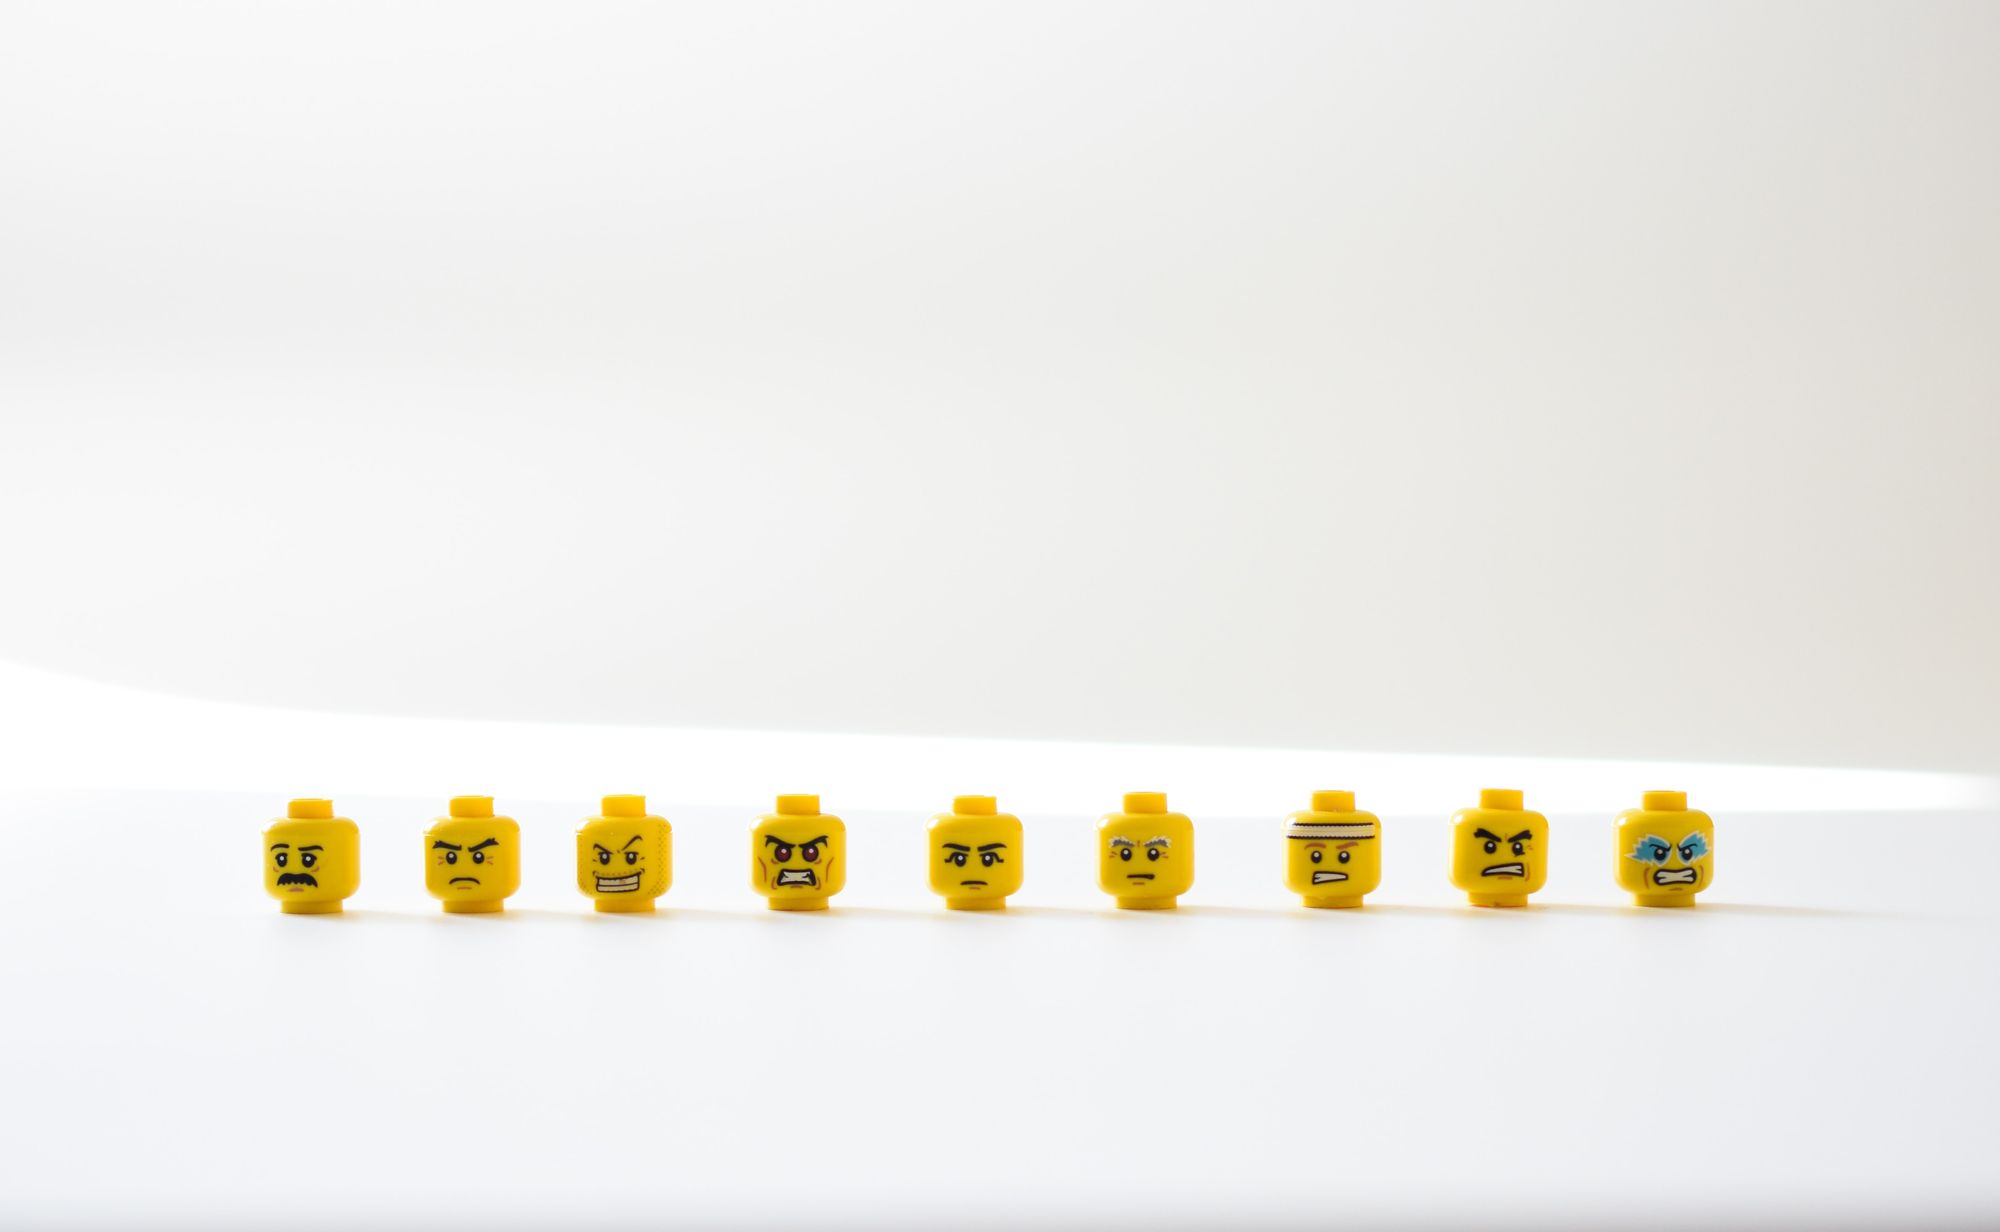 Image of lego heads in a line each with a slightly different angry expression